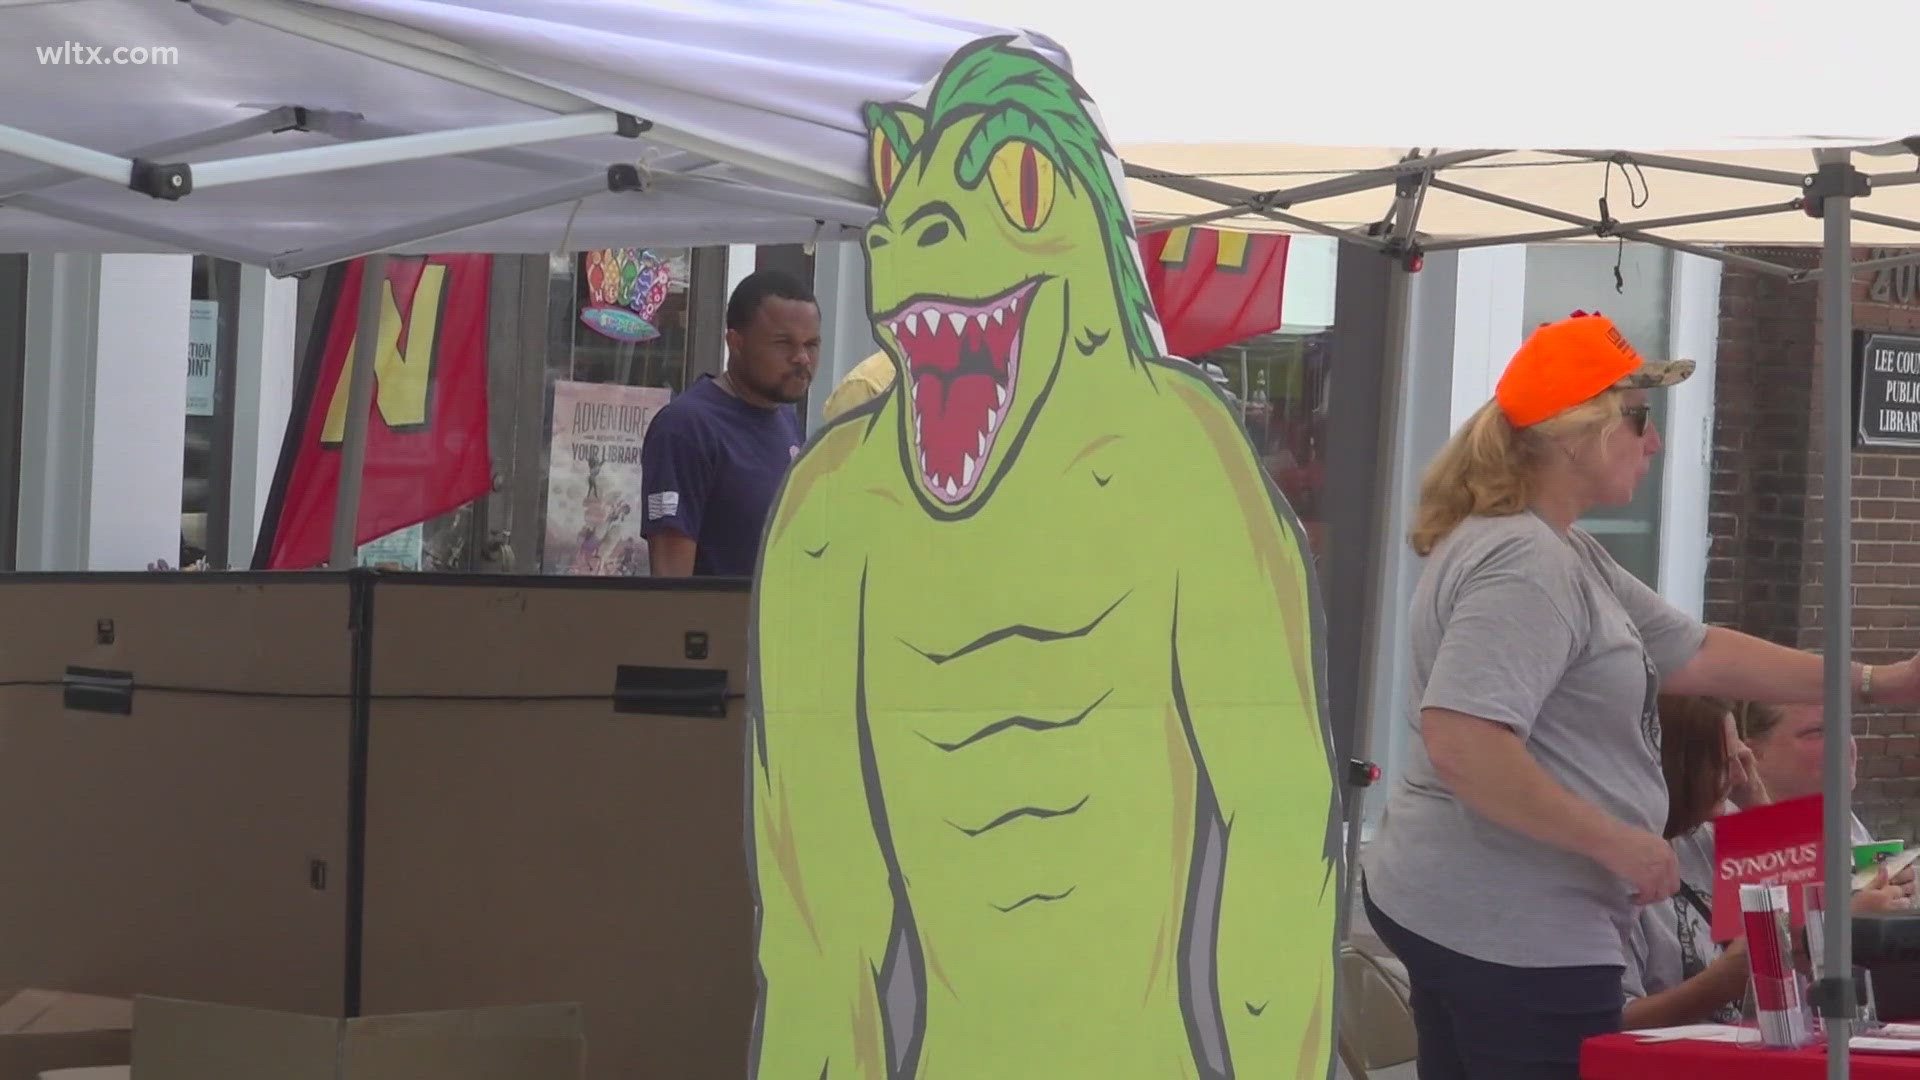 Lee County's Lizard Man Stomp festival celebrates the local legend with themed snacks, memorabilia, and community spirit. The event returns next year.